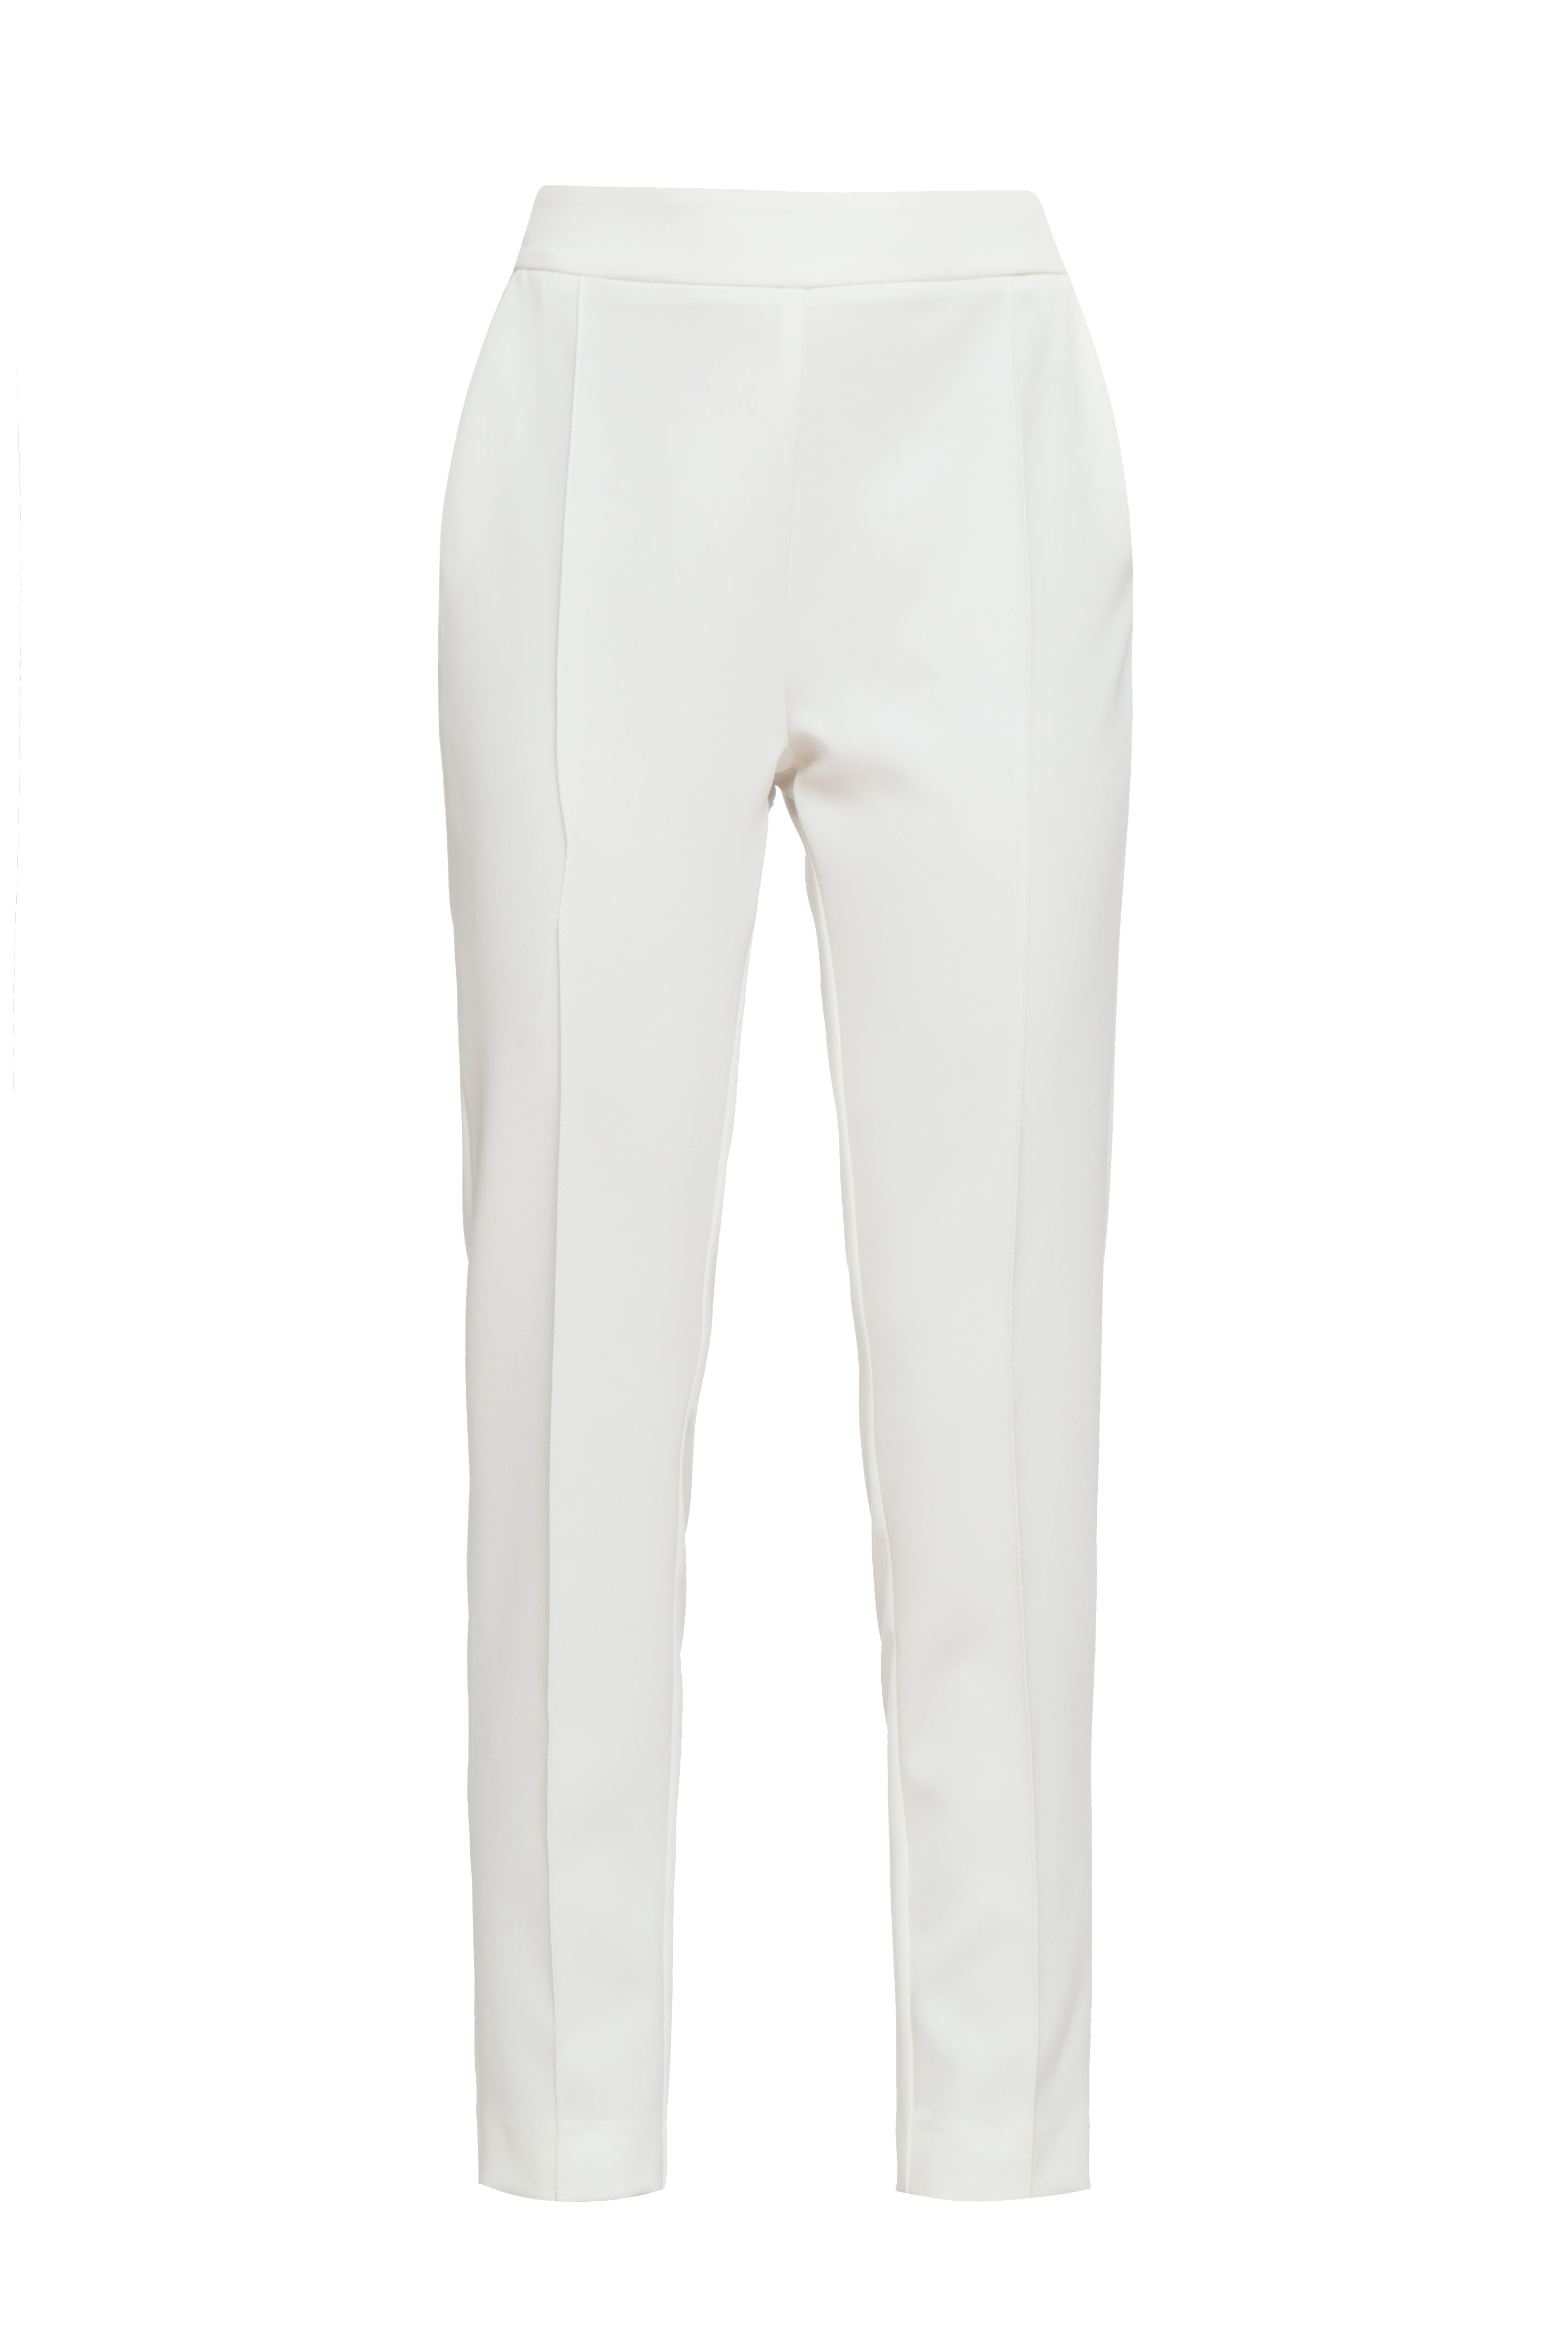 Cliche Reborn Women's White High Waisted Slim Fit Trousers